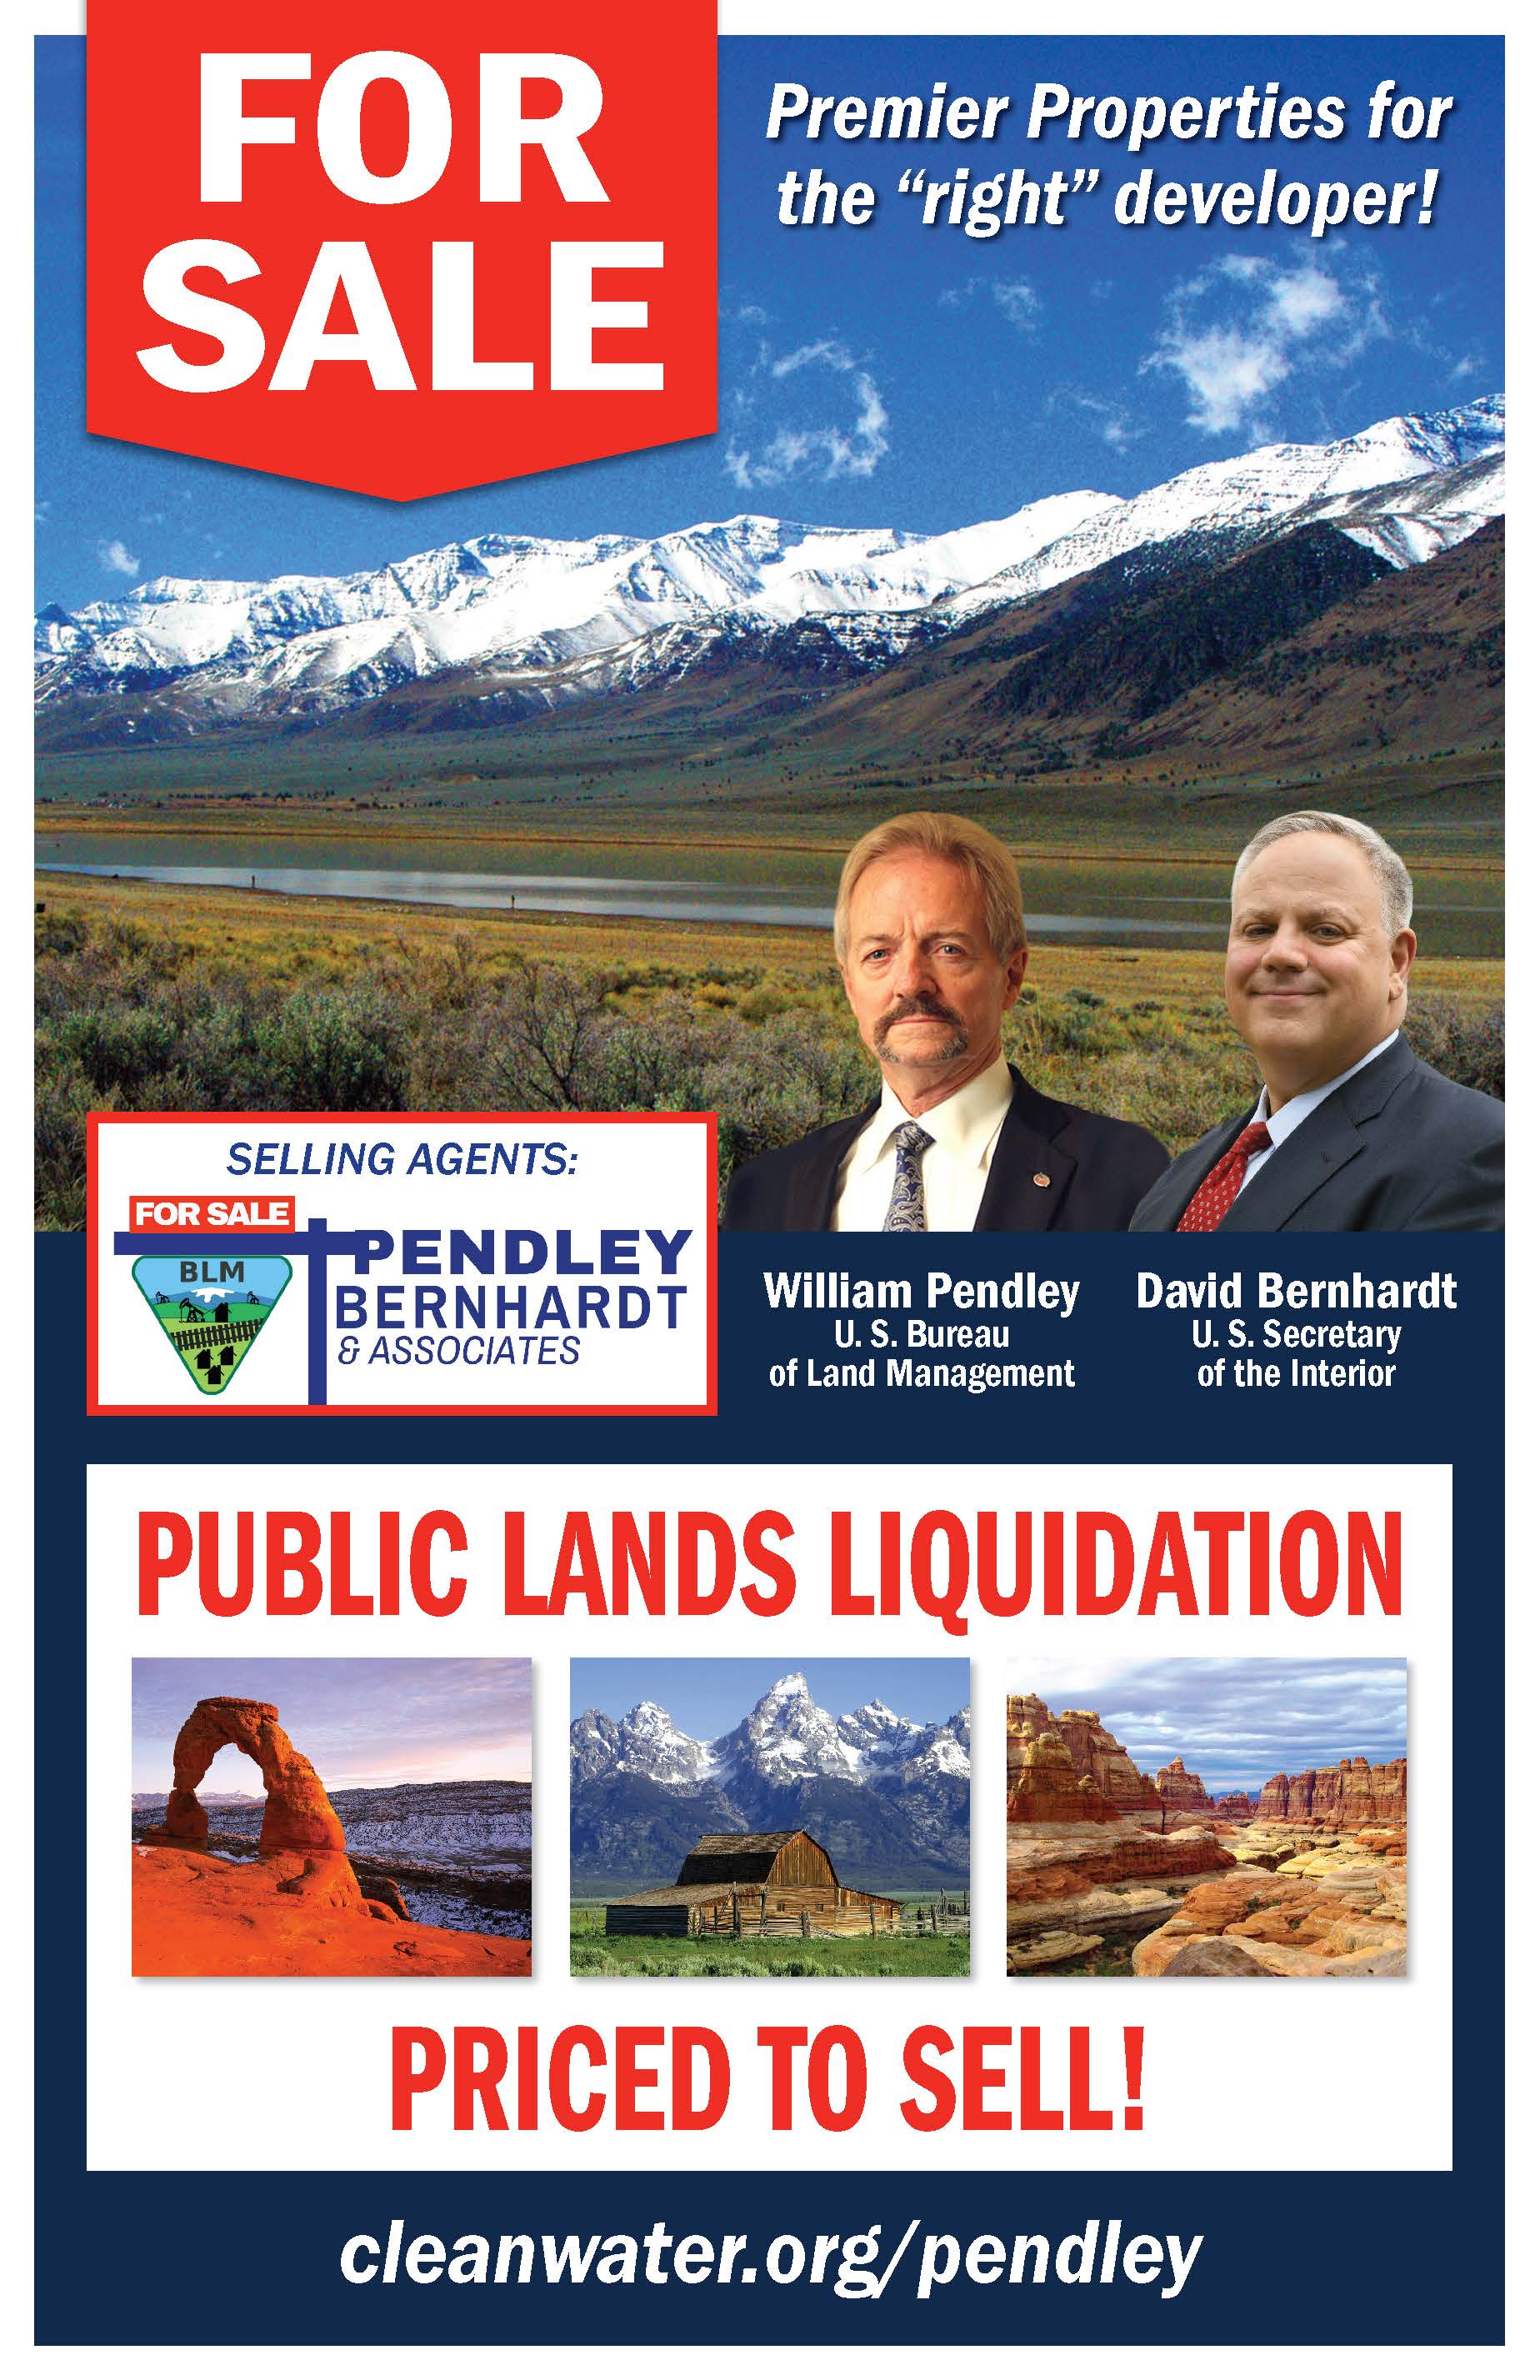 Stop Pendley from selling off public lands